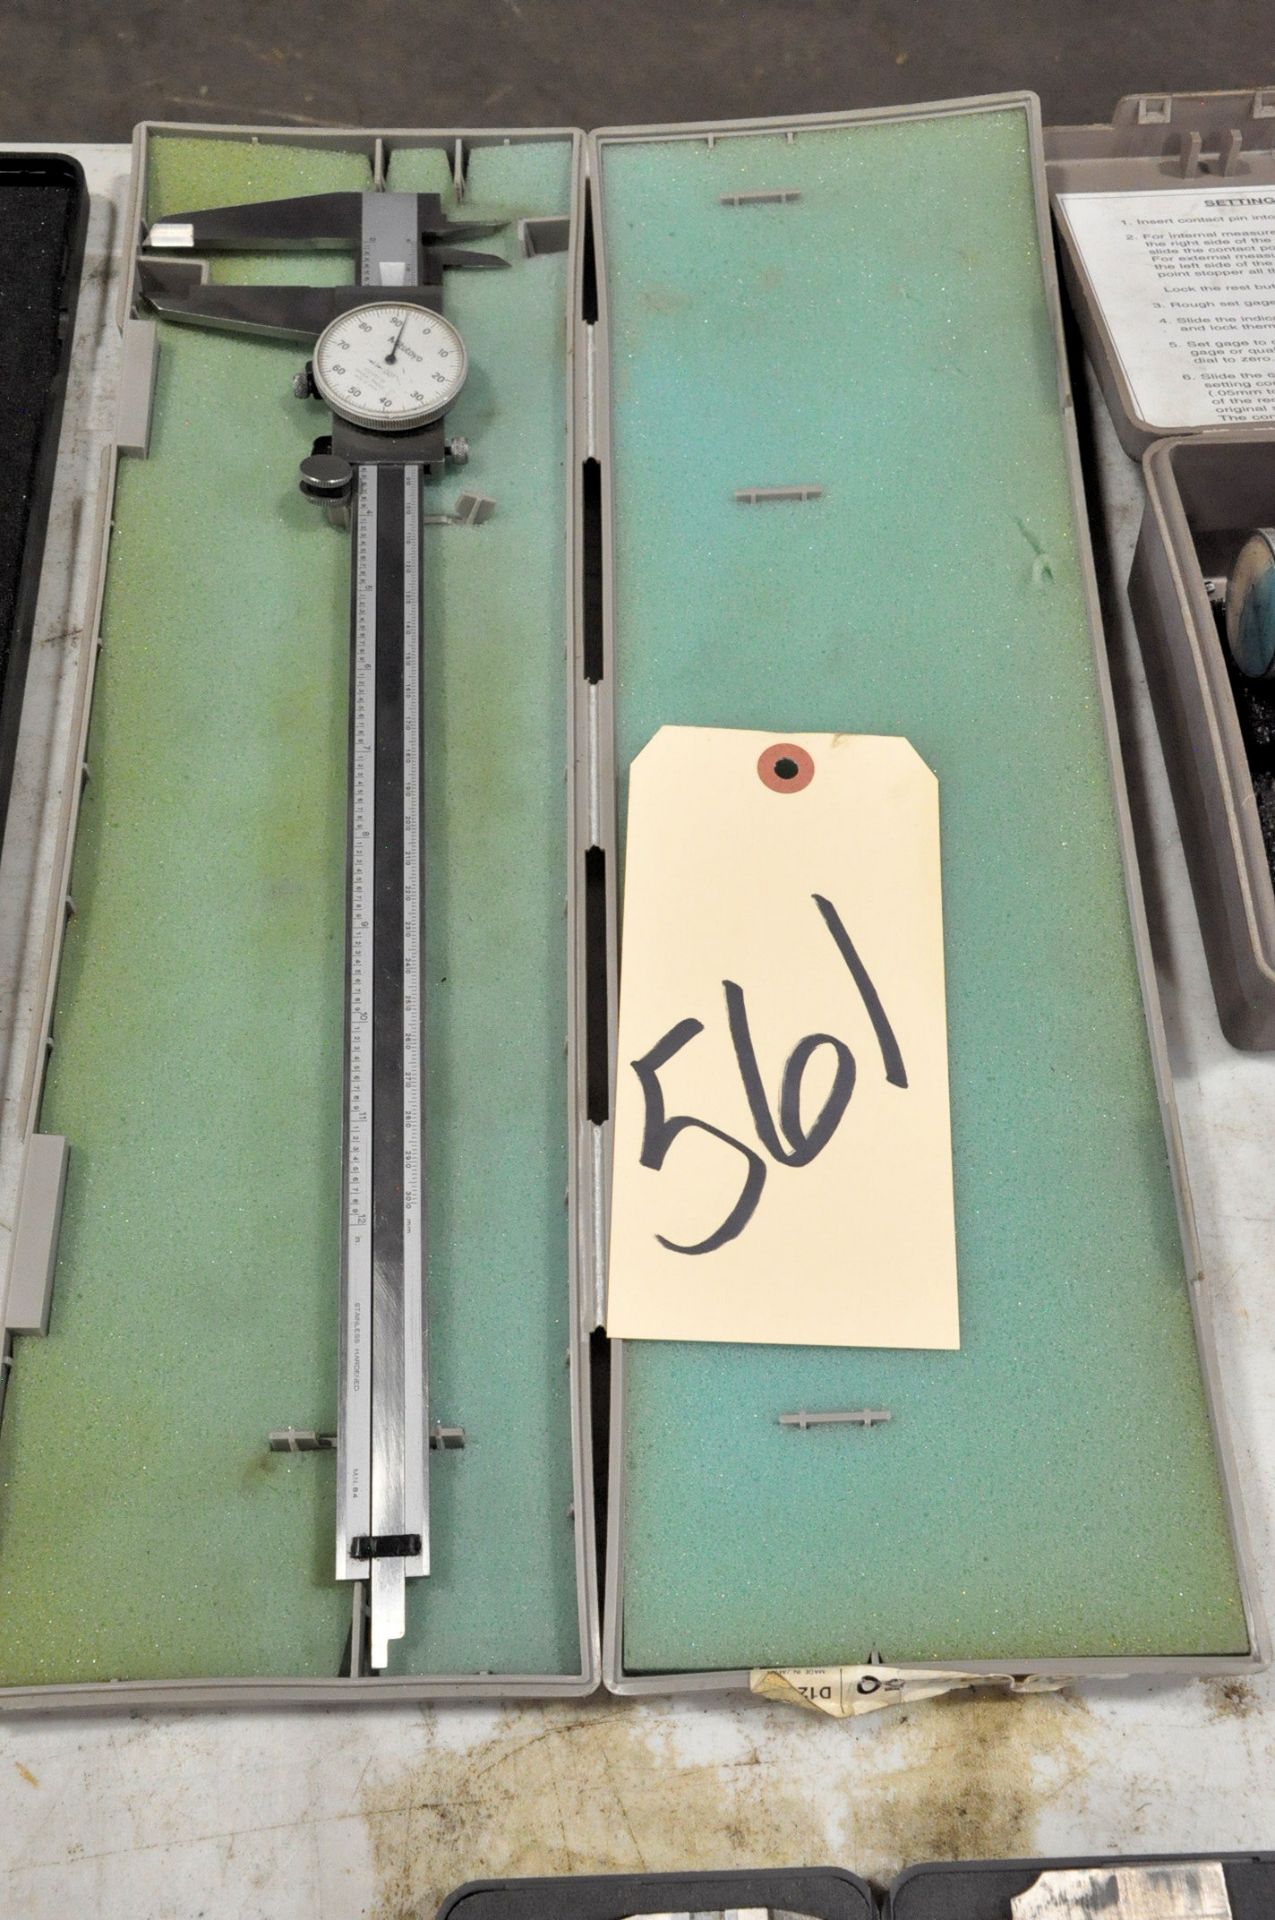 Mitutoyo 12" Dial Caliper with Case - Image 2 of 2